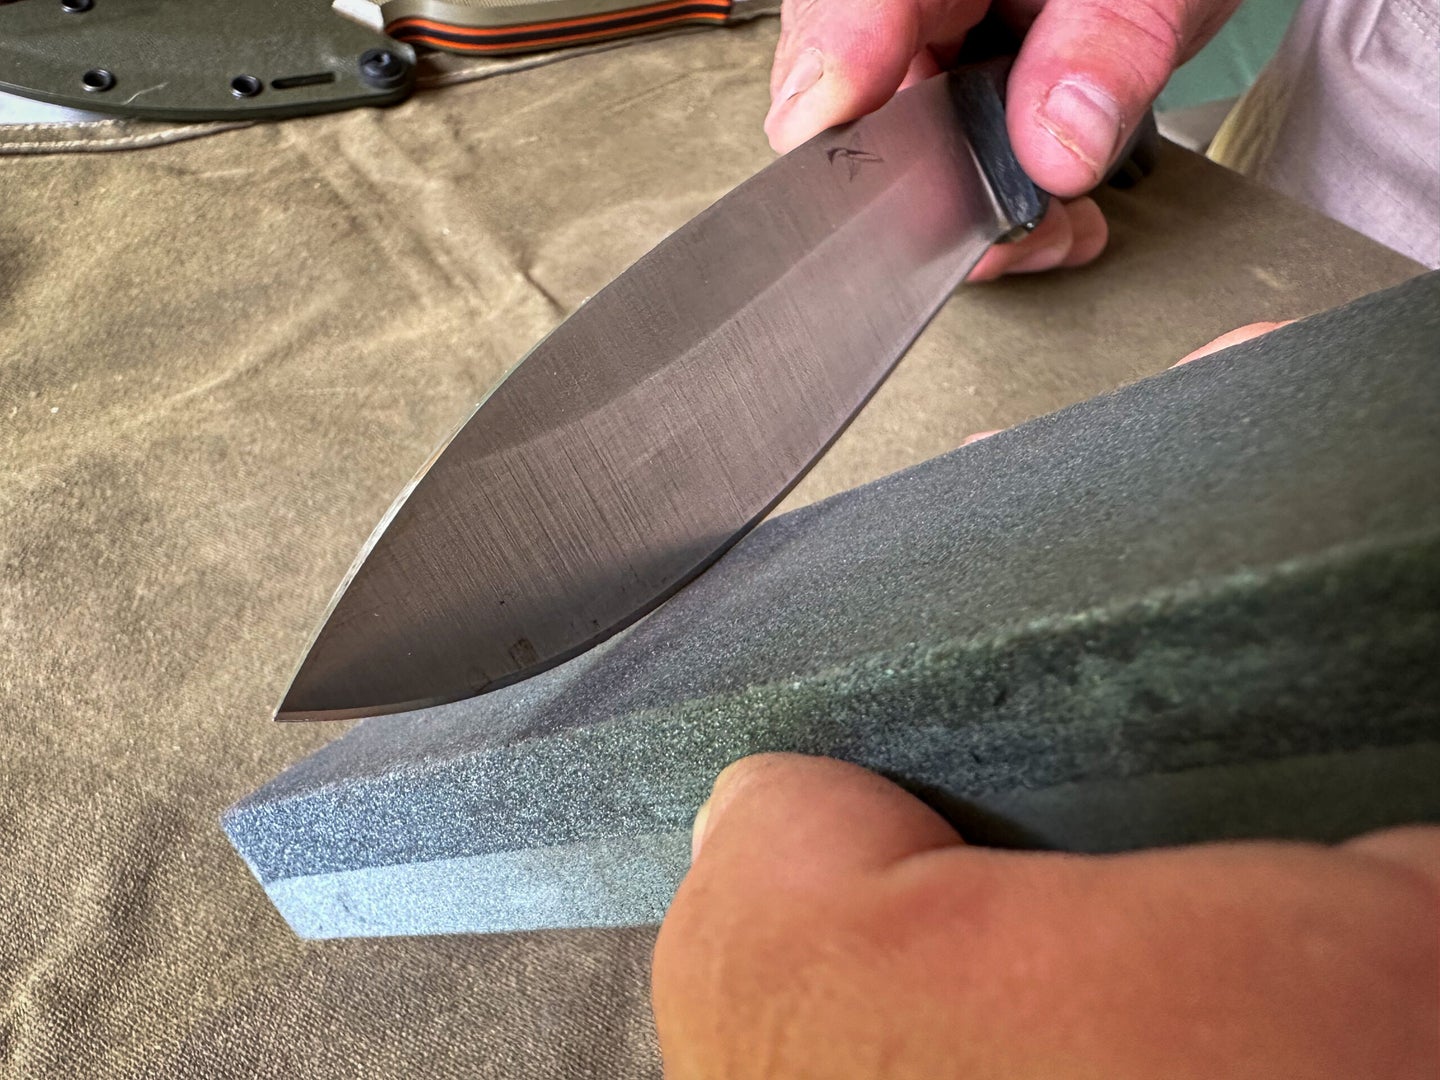 I'm new to knives. Can I sharpen this knife with a regular knife sharpener(as  seen in the pic)? Or should I take it to some one to sharpen it. I just  wanna